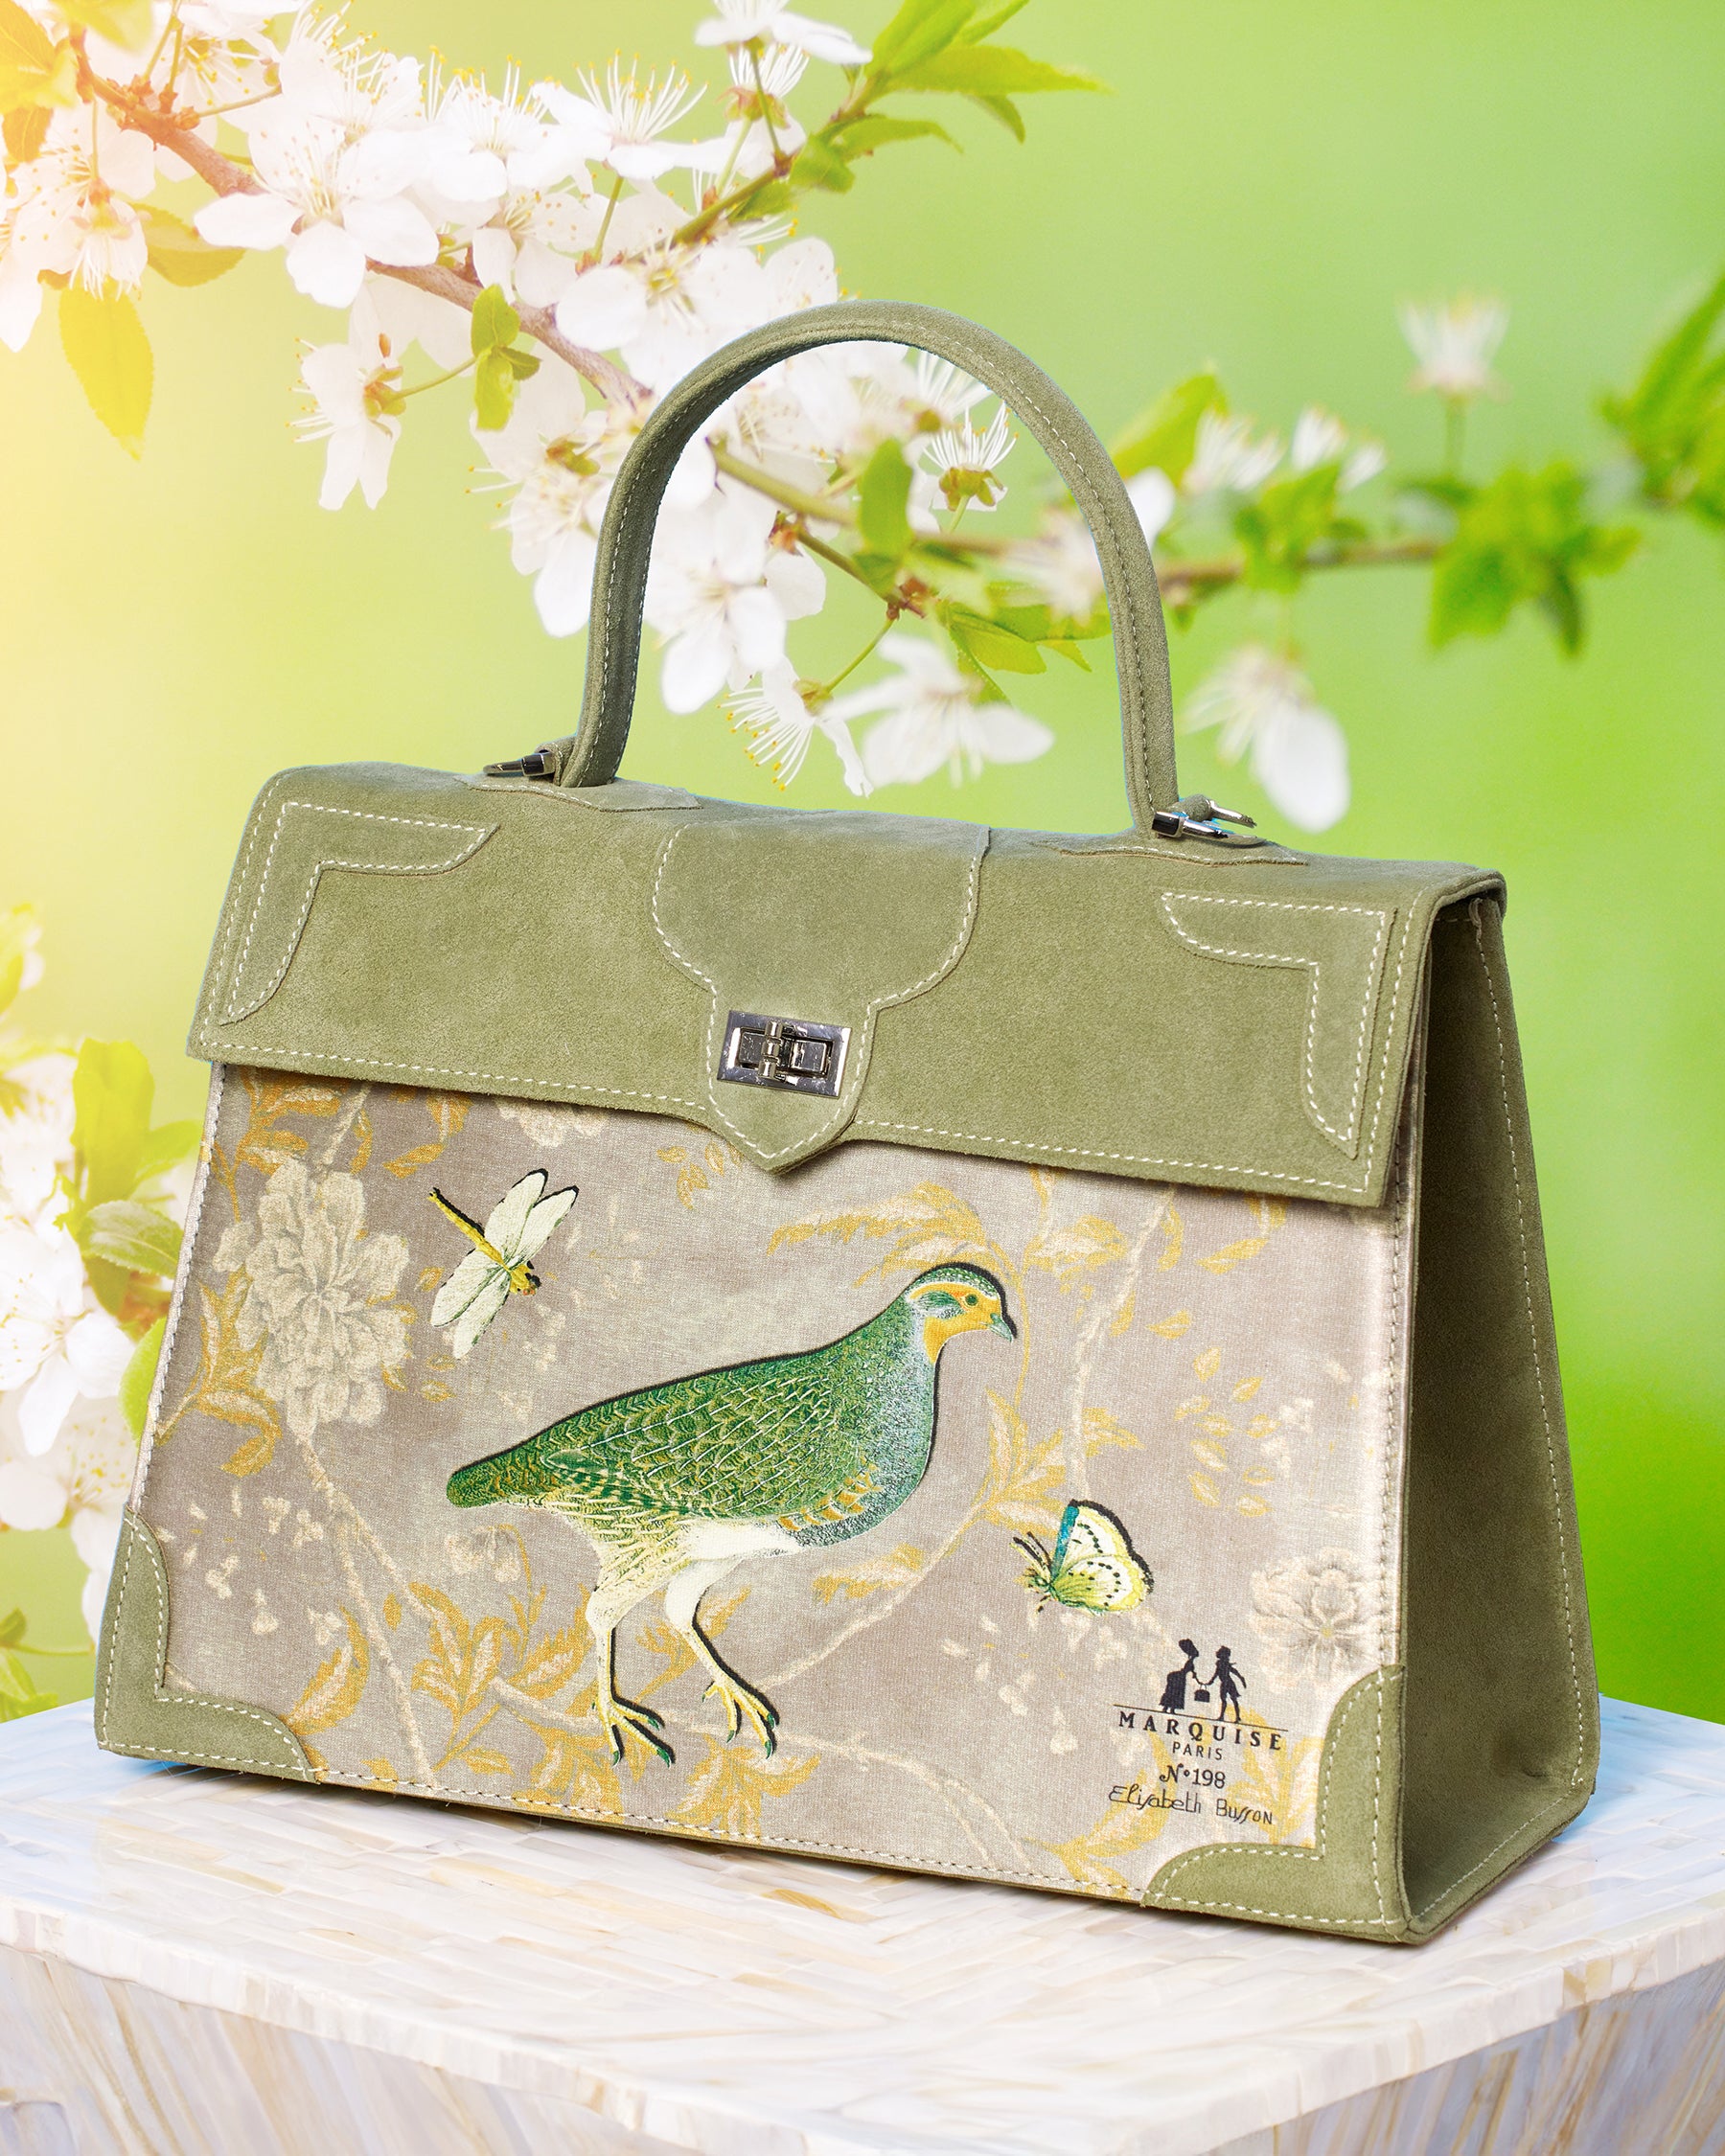 Marquise Paris Marquise Le Perdreau Top Handle Shoulder Bag in Moss Green-Three quarter view